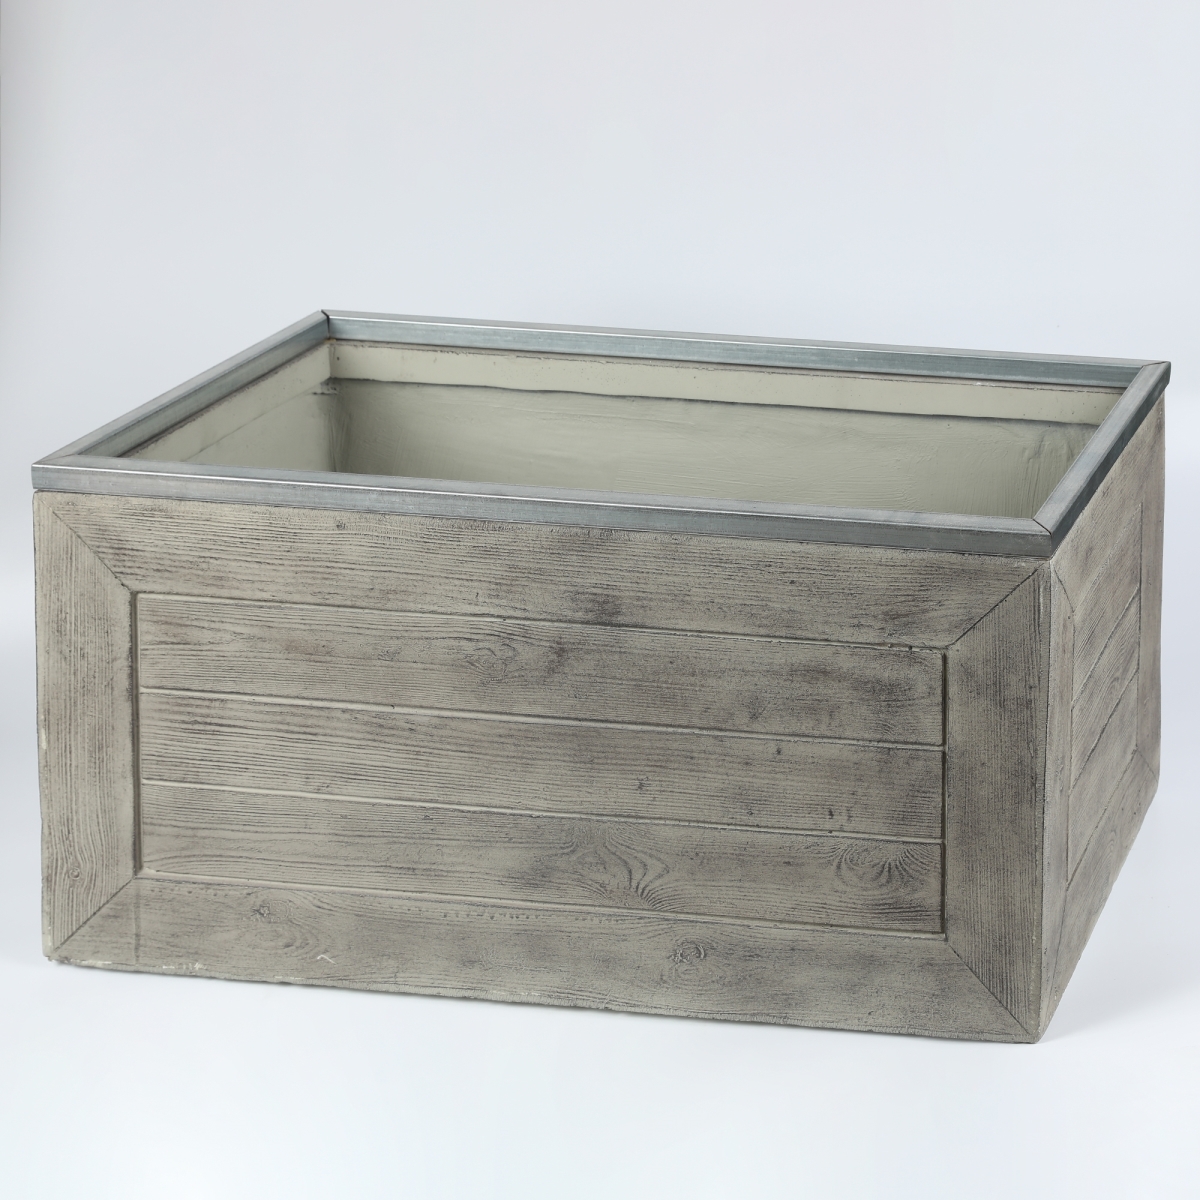 Whpl712 15.6 X 30 In. Rectangular Mgo Fiberclay Crate Style Planter